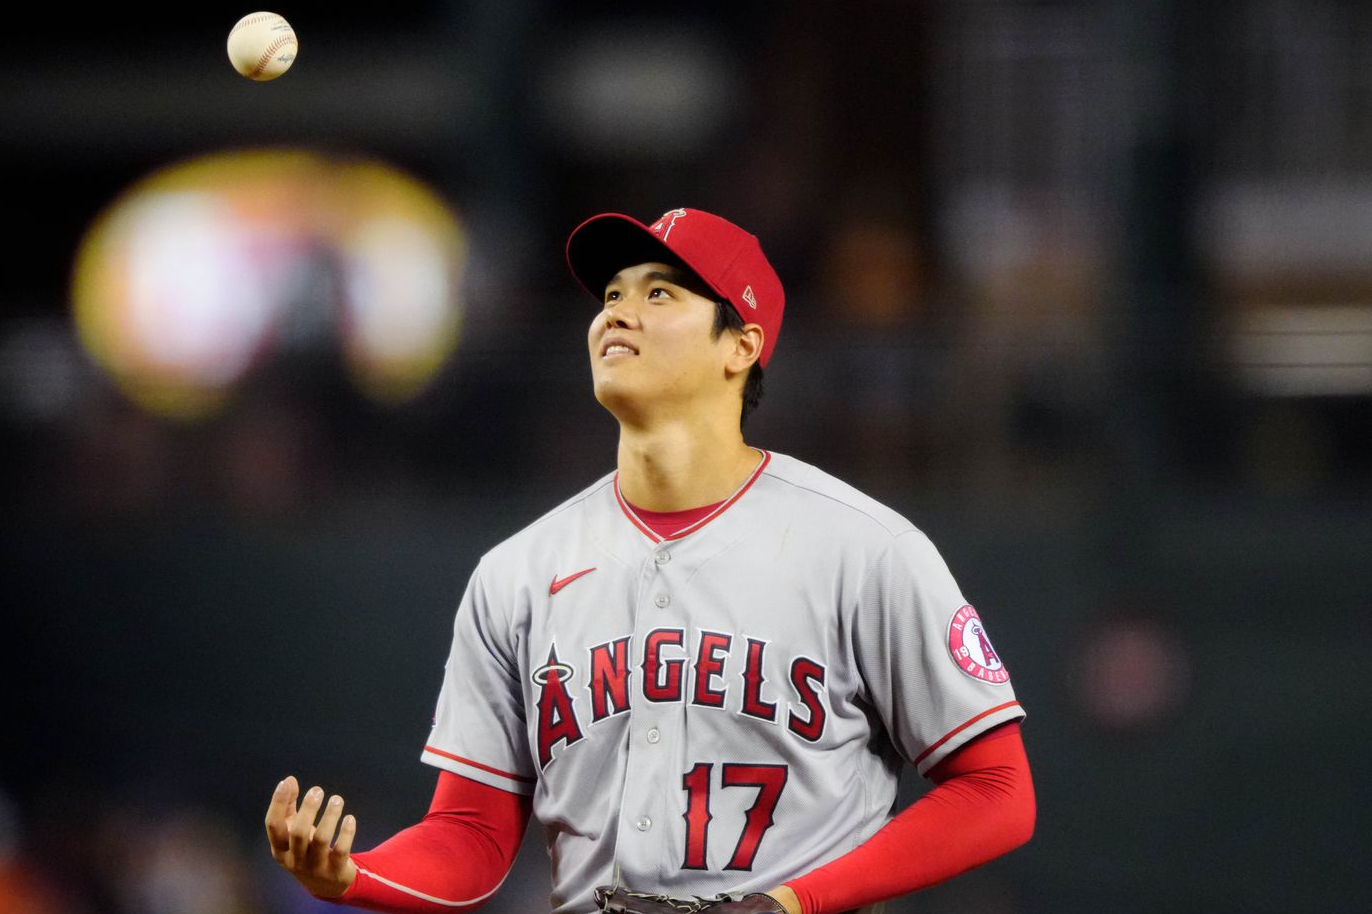 MLB - It's Sho time. The Angels have activated Shohei Ohtani.